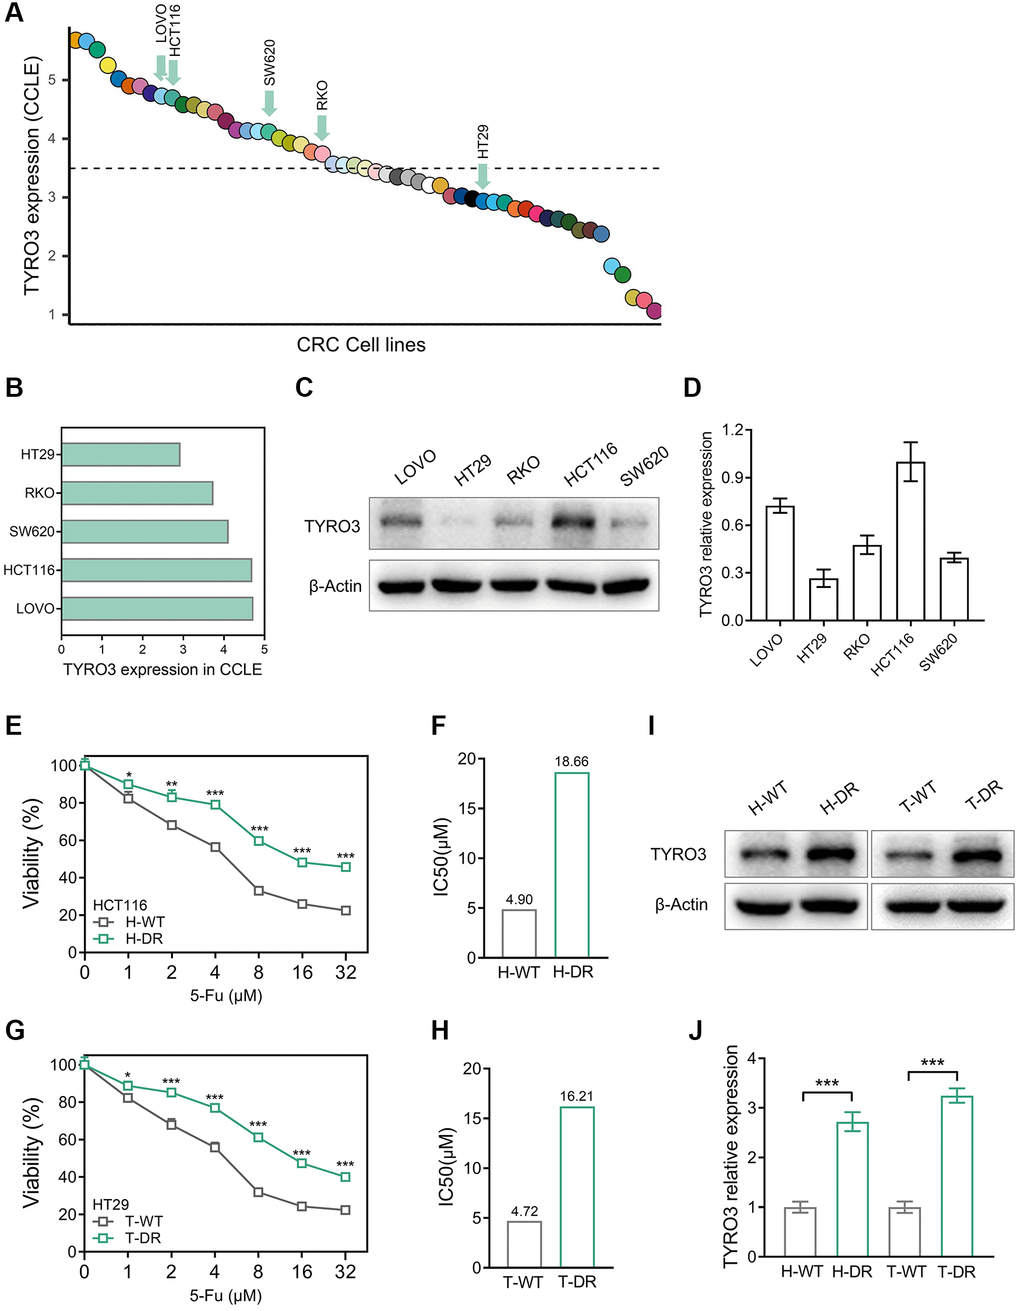 Construction of drug-resistant cell lines and alteration of TYRO3 expression. (A) TYRO3 expression in CRC cell lines searched from the CCLE platform. (B) TYRO3 expression in 5 CRC cell lines selected by CCLE platform. (C) TYRO3 expression in 5 CRC cell lines evaluated by Western blot. (D) Immunoblot result of TYRO3 expression in 5 CRC cell lines quantified by ImageJ. (E) The viability of H-WT and H-DR treated with different concentrations of 5-Fu for 24 hours. (F) The IC50 of H-WT and H-DR treated with 5-Fu. (G) The viability of T-WT and T-DR treated with different concentrations of 5-Fu for 24 hours. (H) The IC50 of T-WT and T-DR treated with 5-Fu. (I) Western blot detecting the change of TYRO3 protein levels in wild type and drug-resistance CRC cells. (J) Immunoblot result of wild type and drug-resistance CRC cells semi-quantified by ImageJ. *P **P ***P 